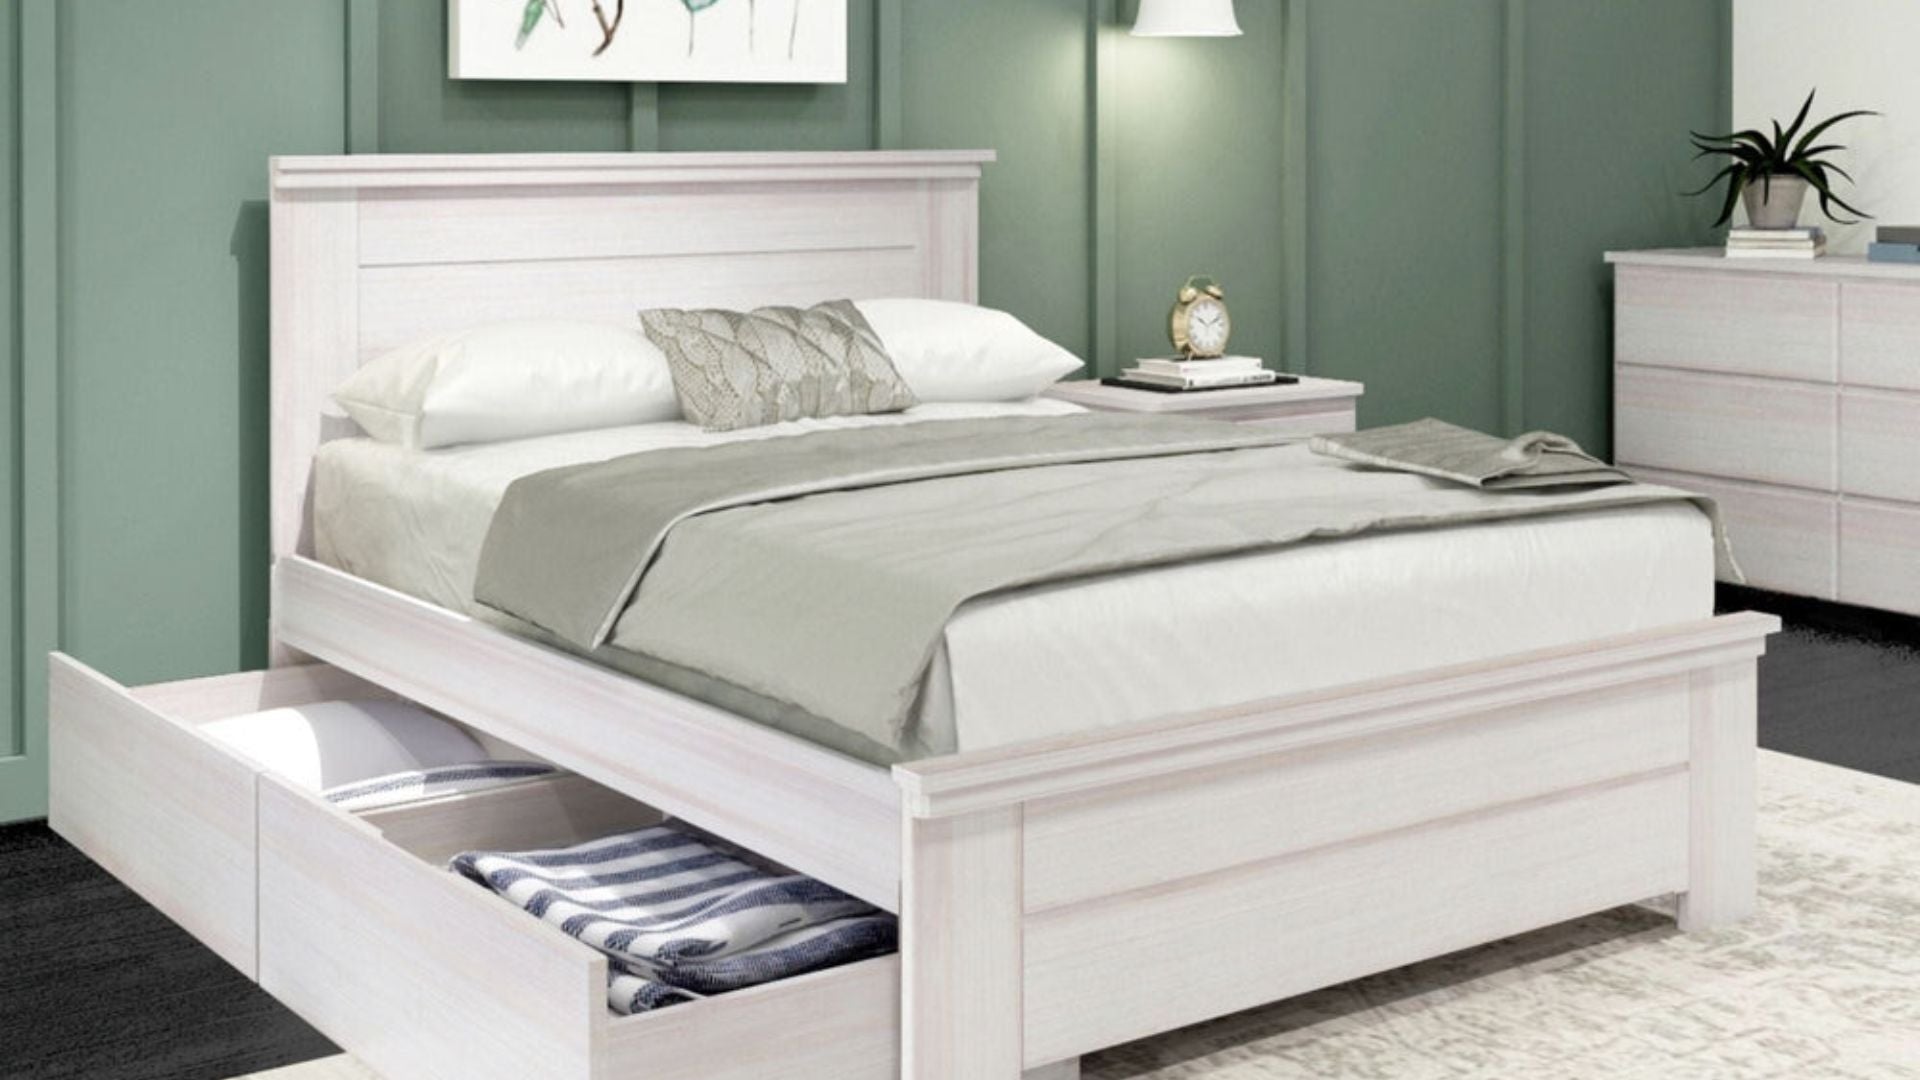 Rustic solid wood queen bed with underbed drawers